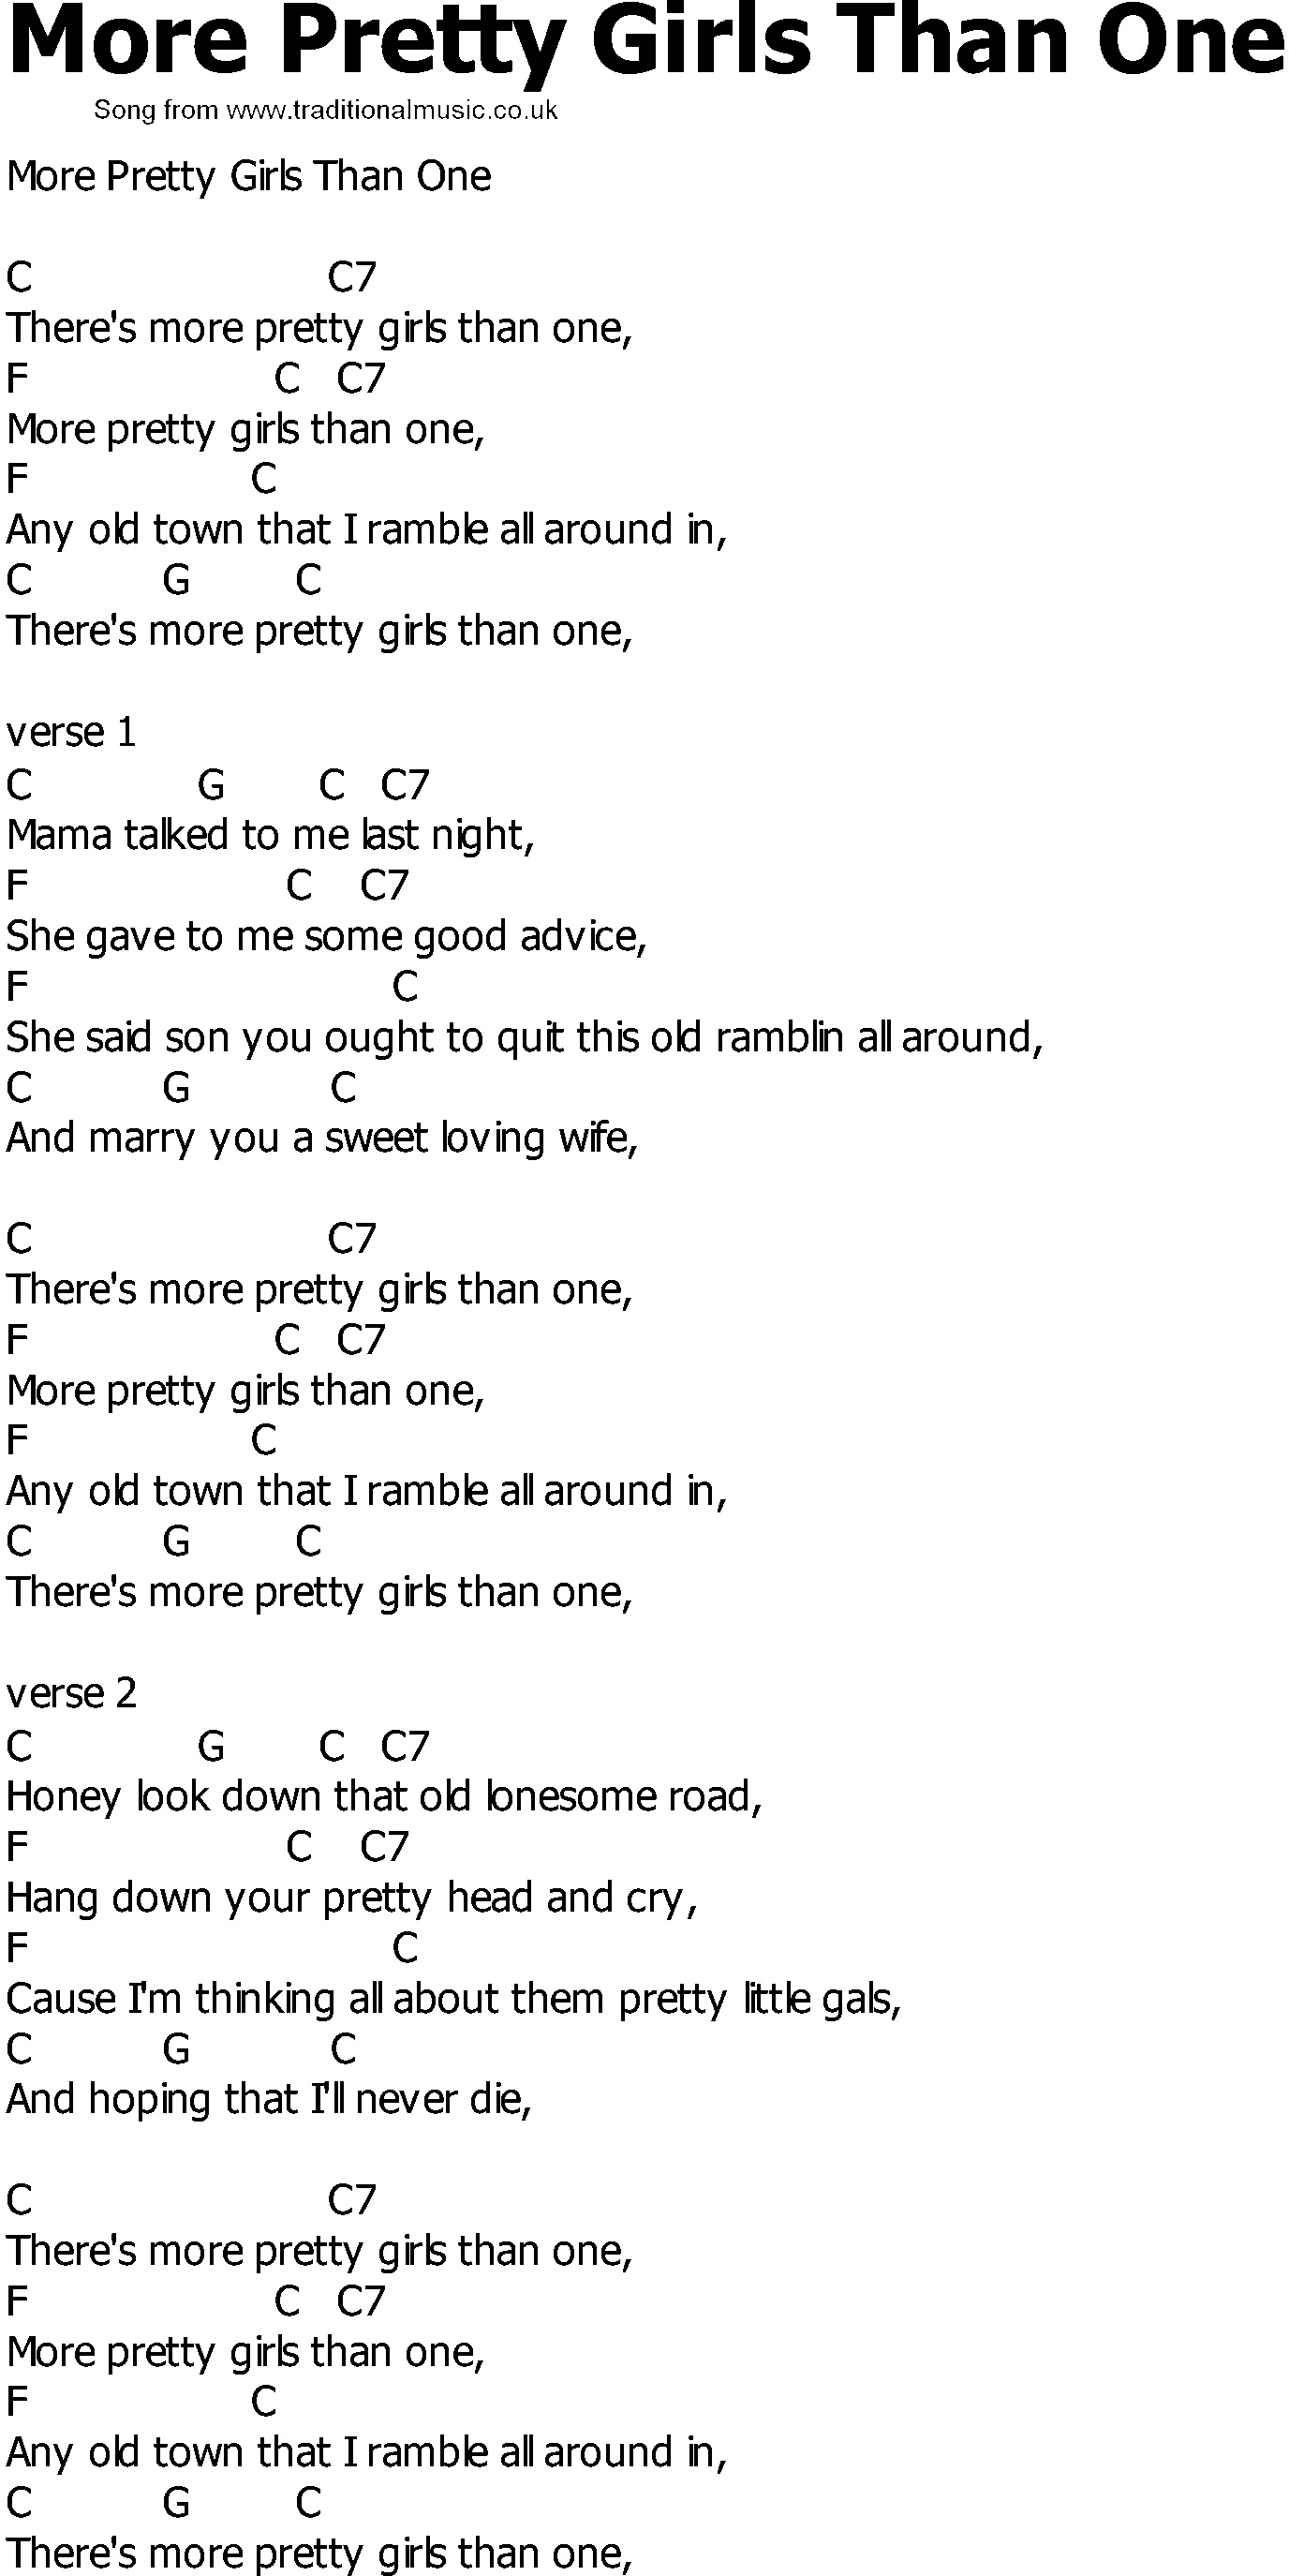 Old Country song lyrics with chords - More Pretty Girls Than One